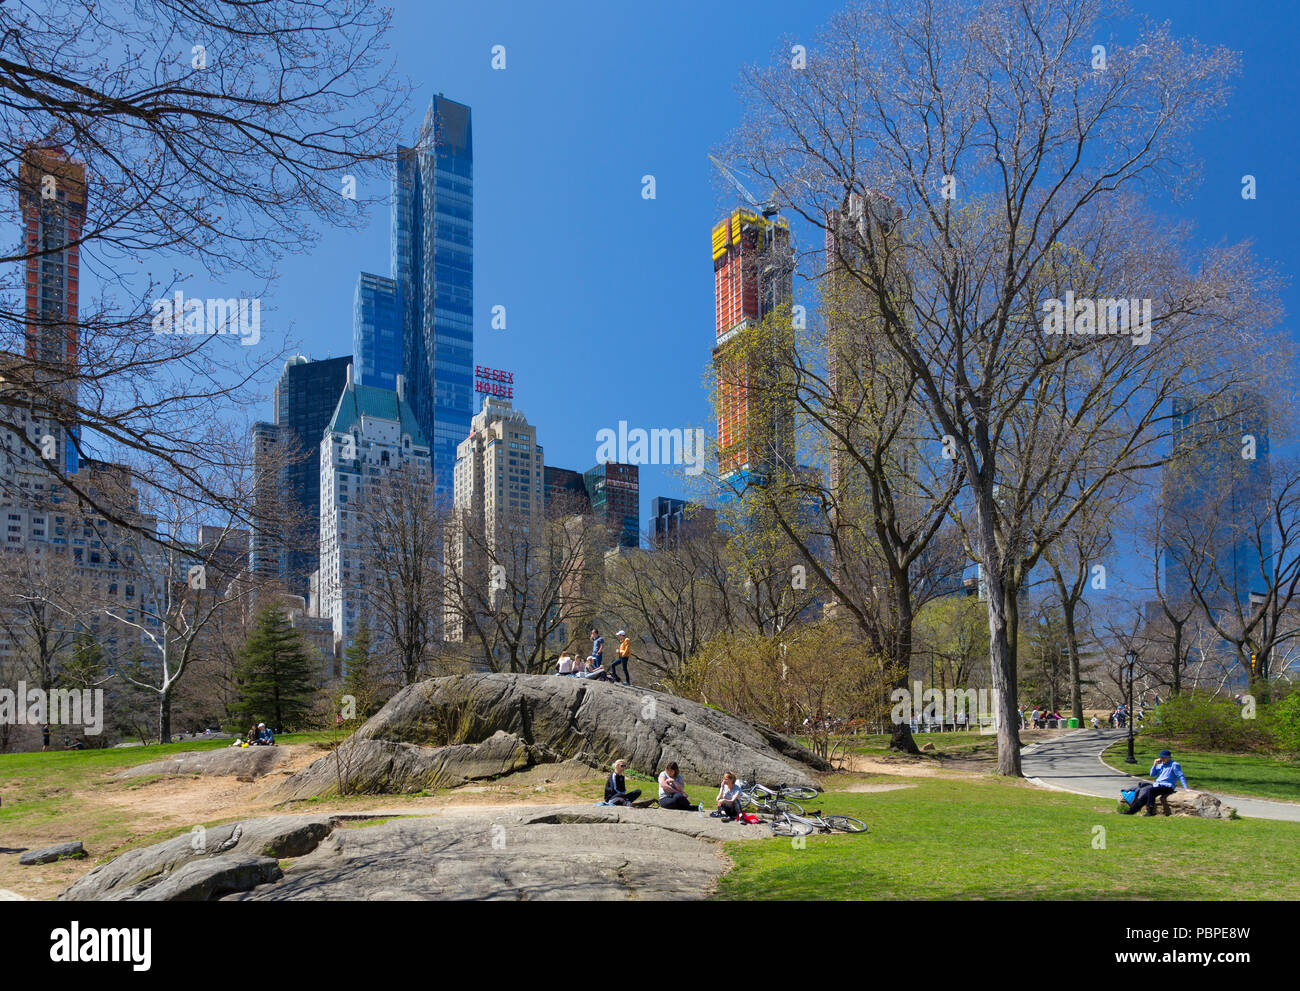 Chilling in the Spring weekend sunshine in Central Park, New York Stock Photo